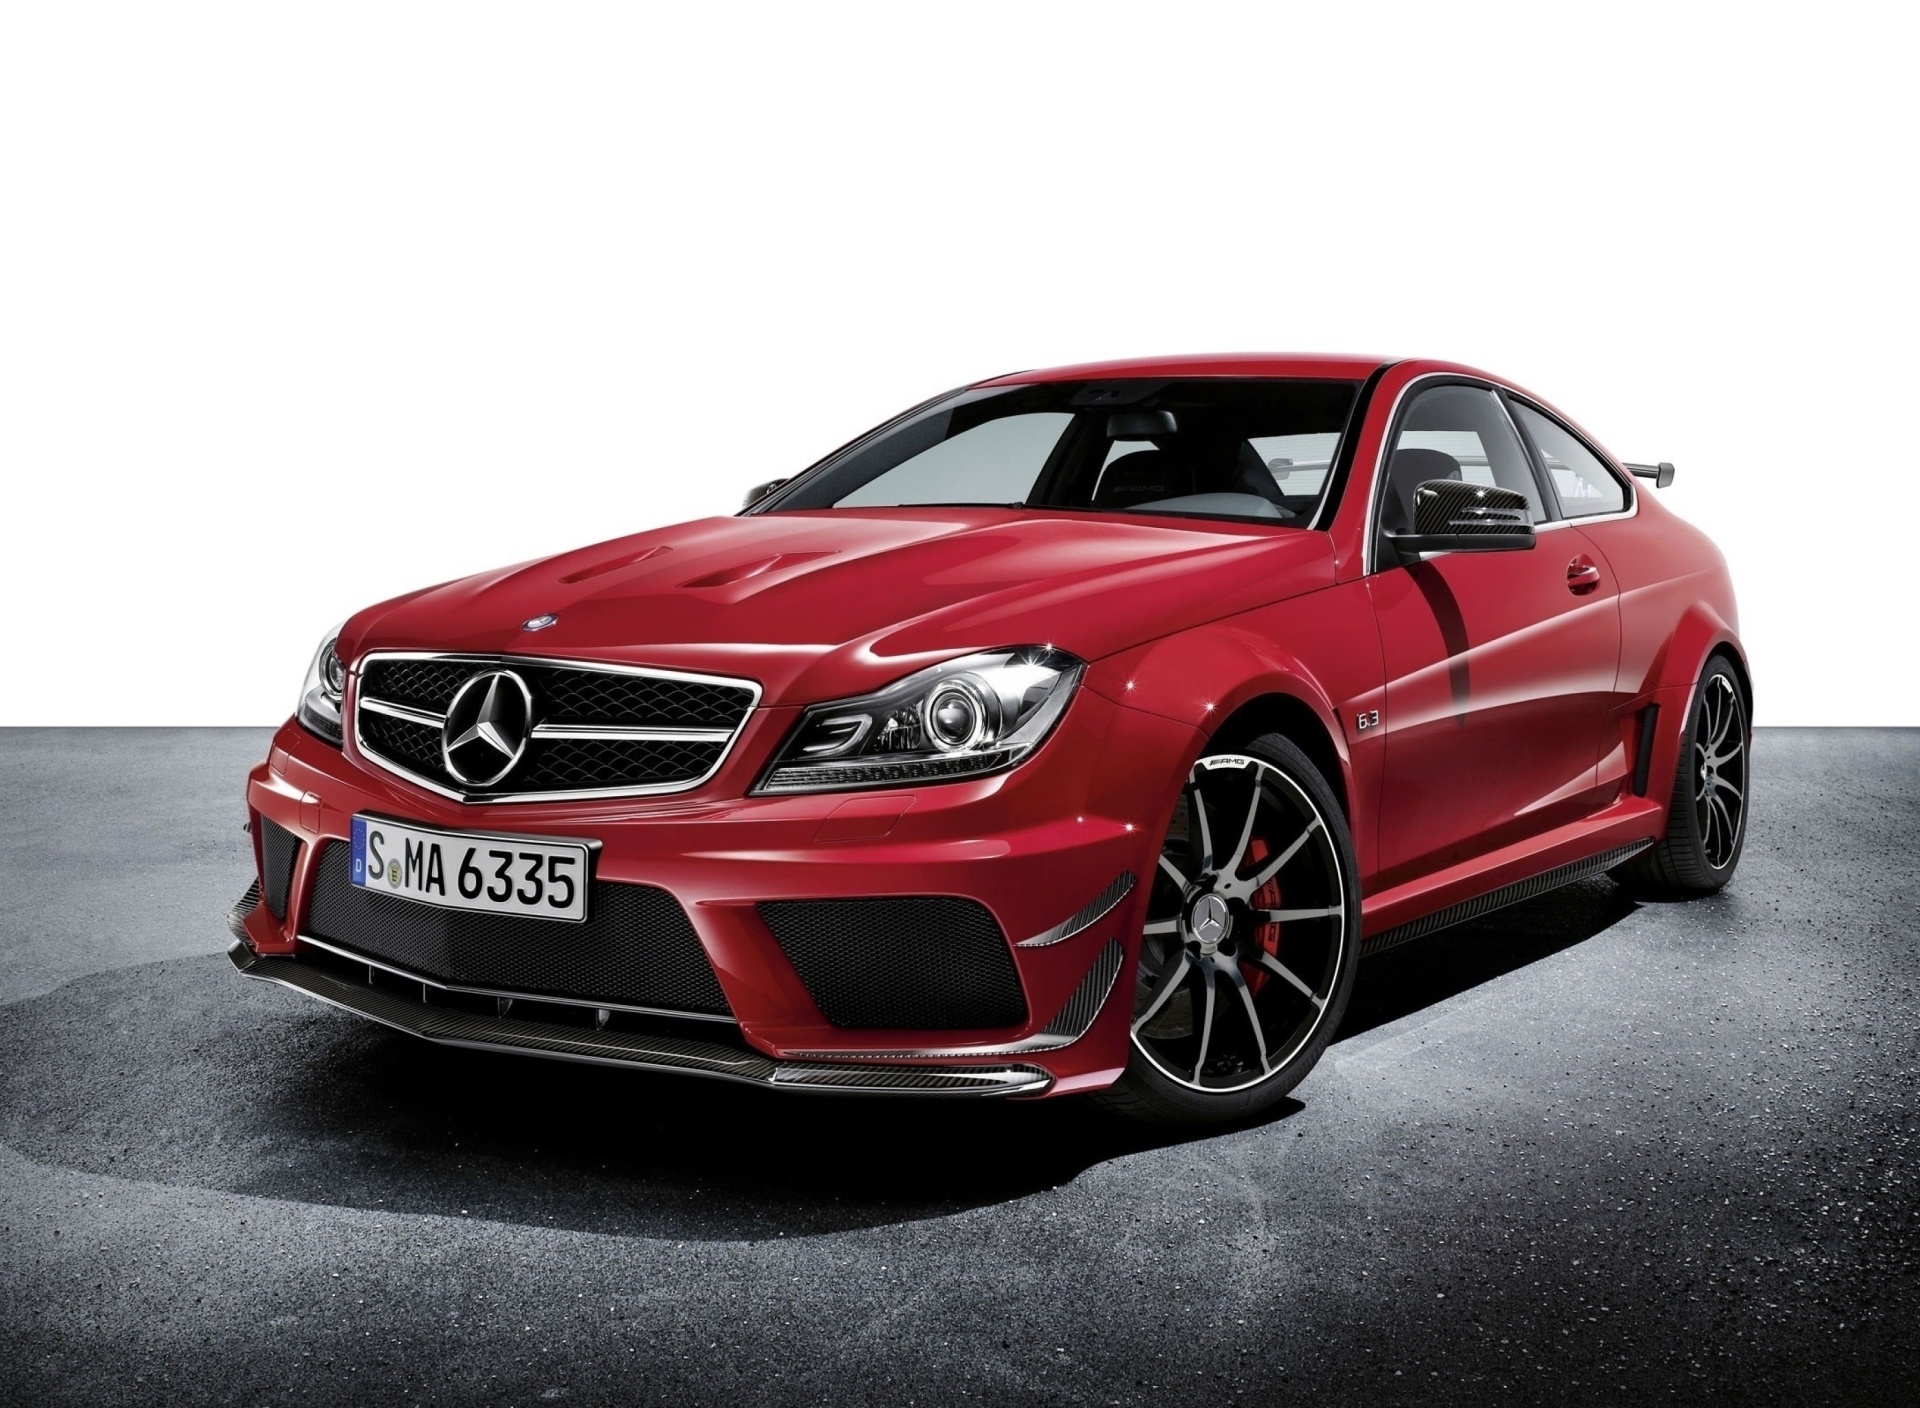 Mercedes C63 AMG Coupe wallpaper 1920x1408